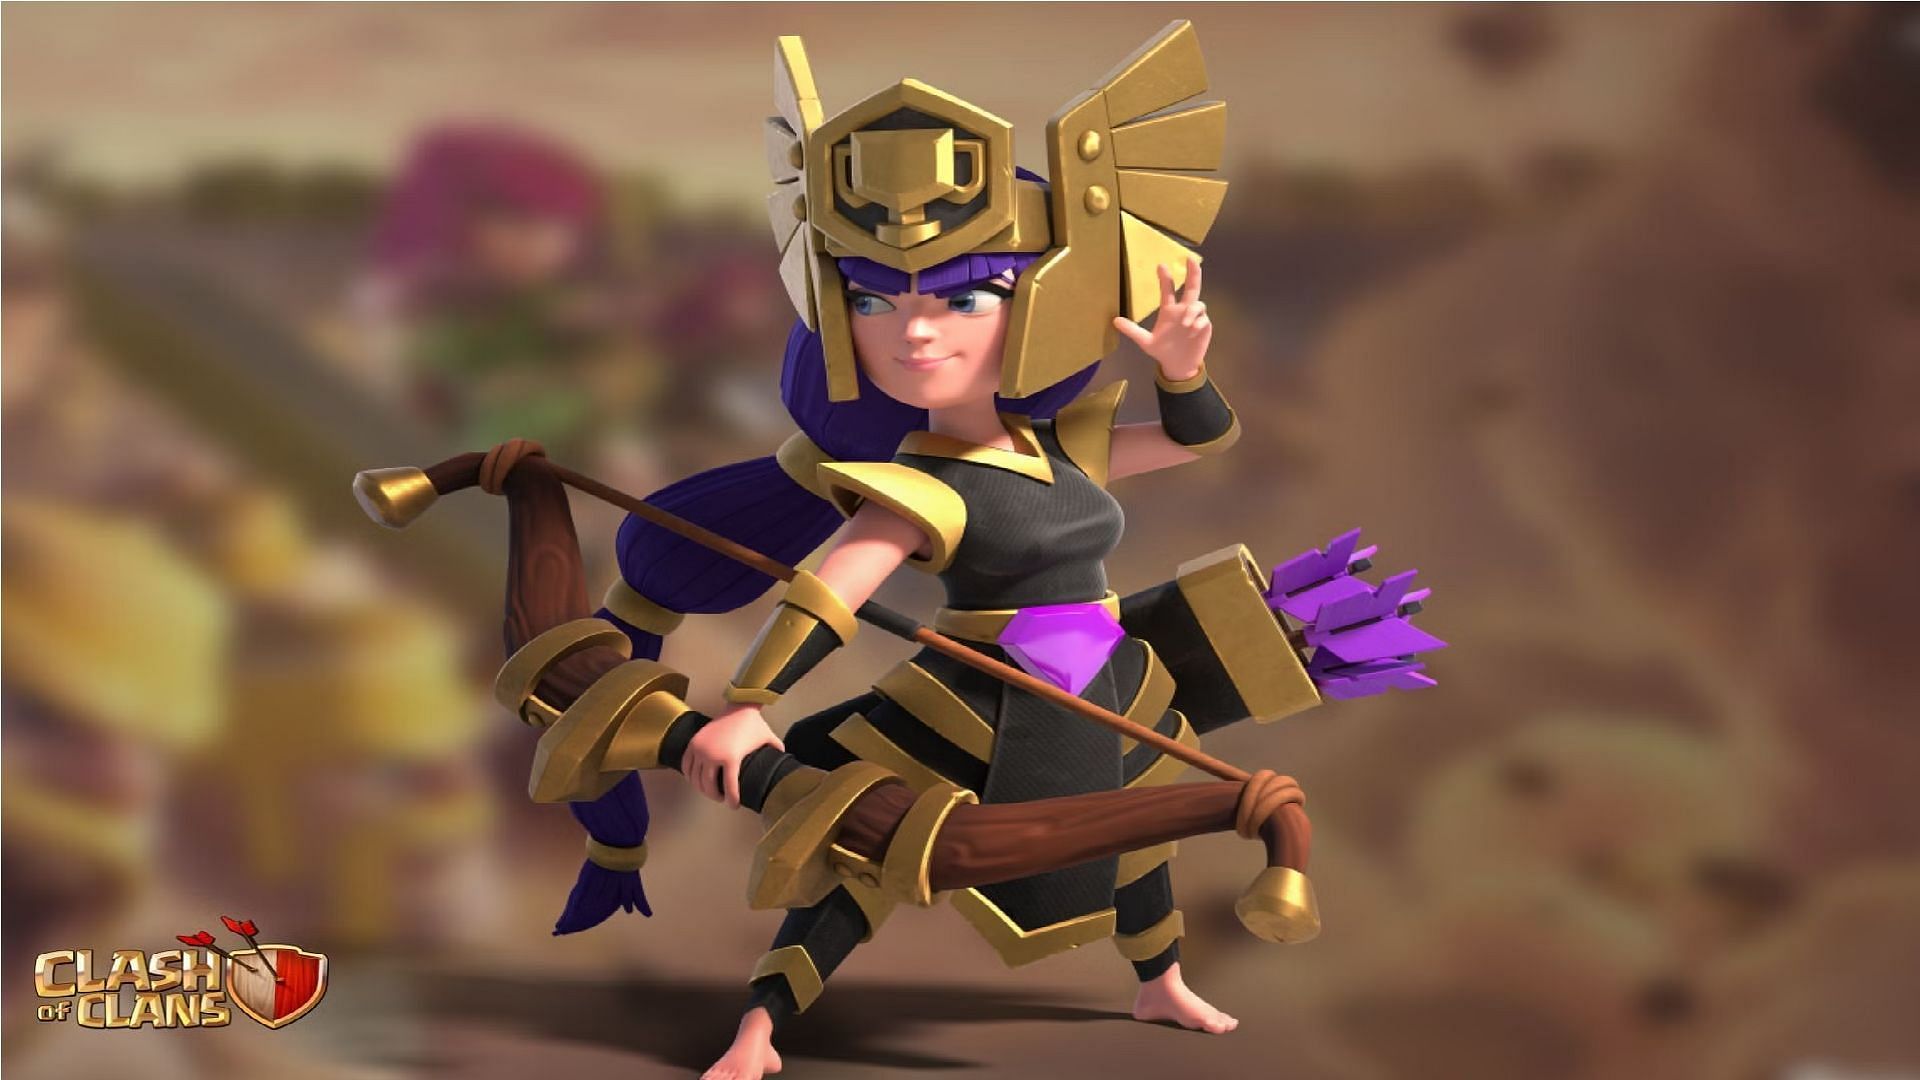 Queen Charge in Clash of Clans